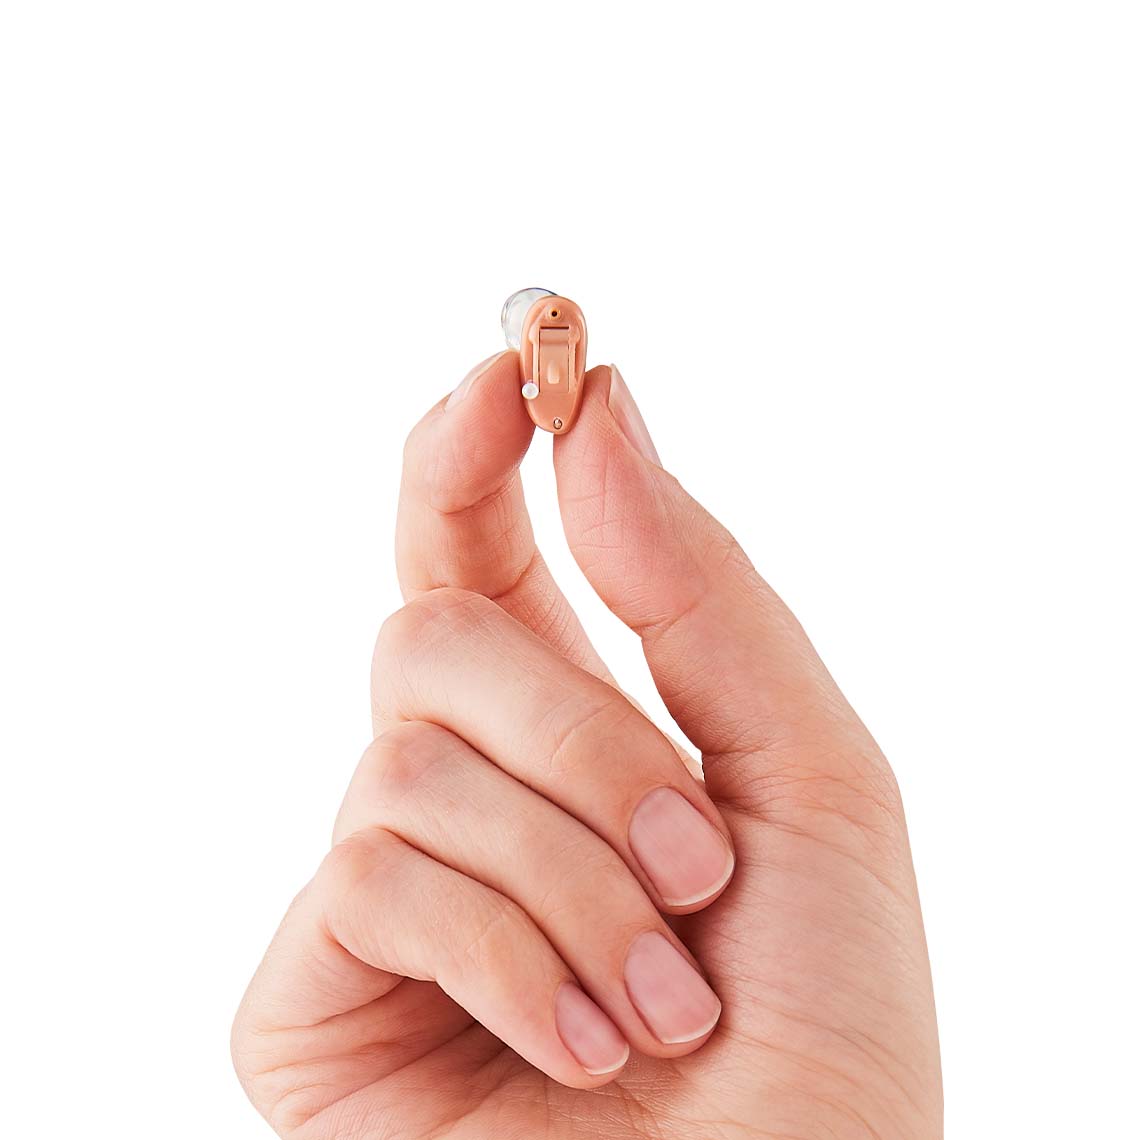 A hand holding a CIC hearing aid